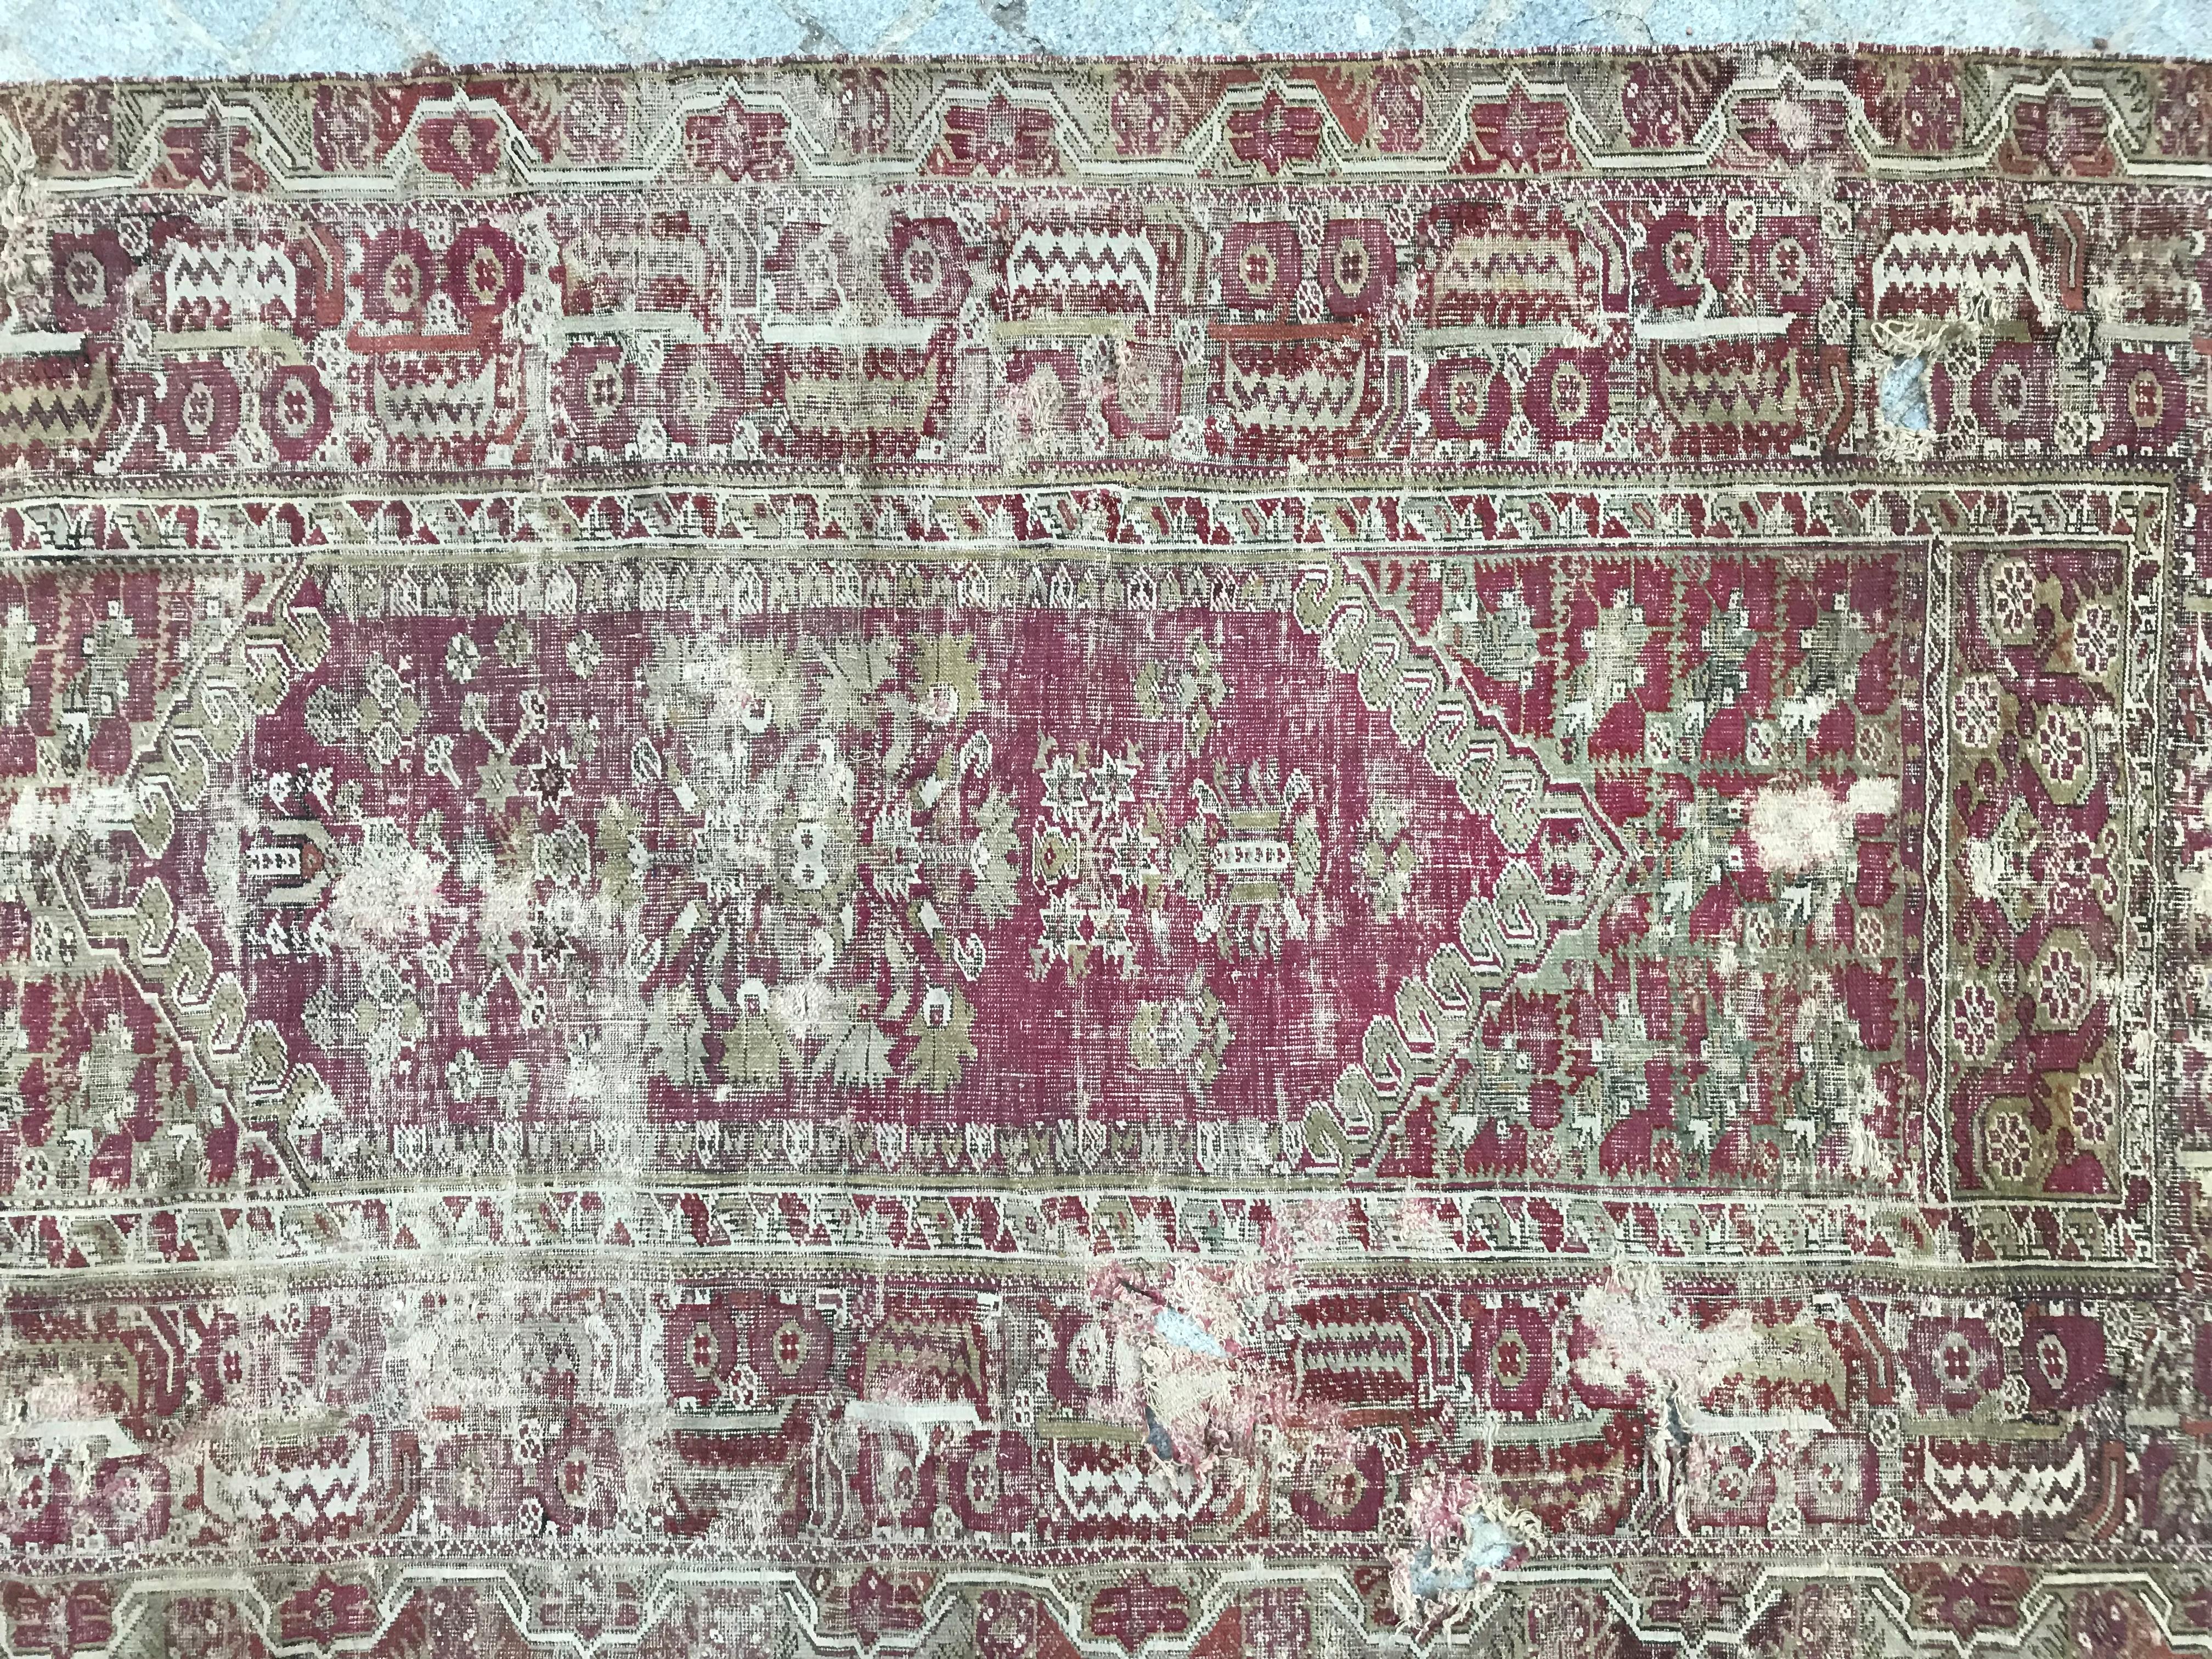 A distressed antique Turkish rug late 18th century with nice Mihrab design and natural colors with purple, brown and green, entirely hand knotted with wool velvet on wool foundation.